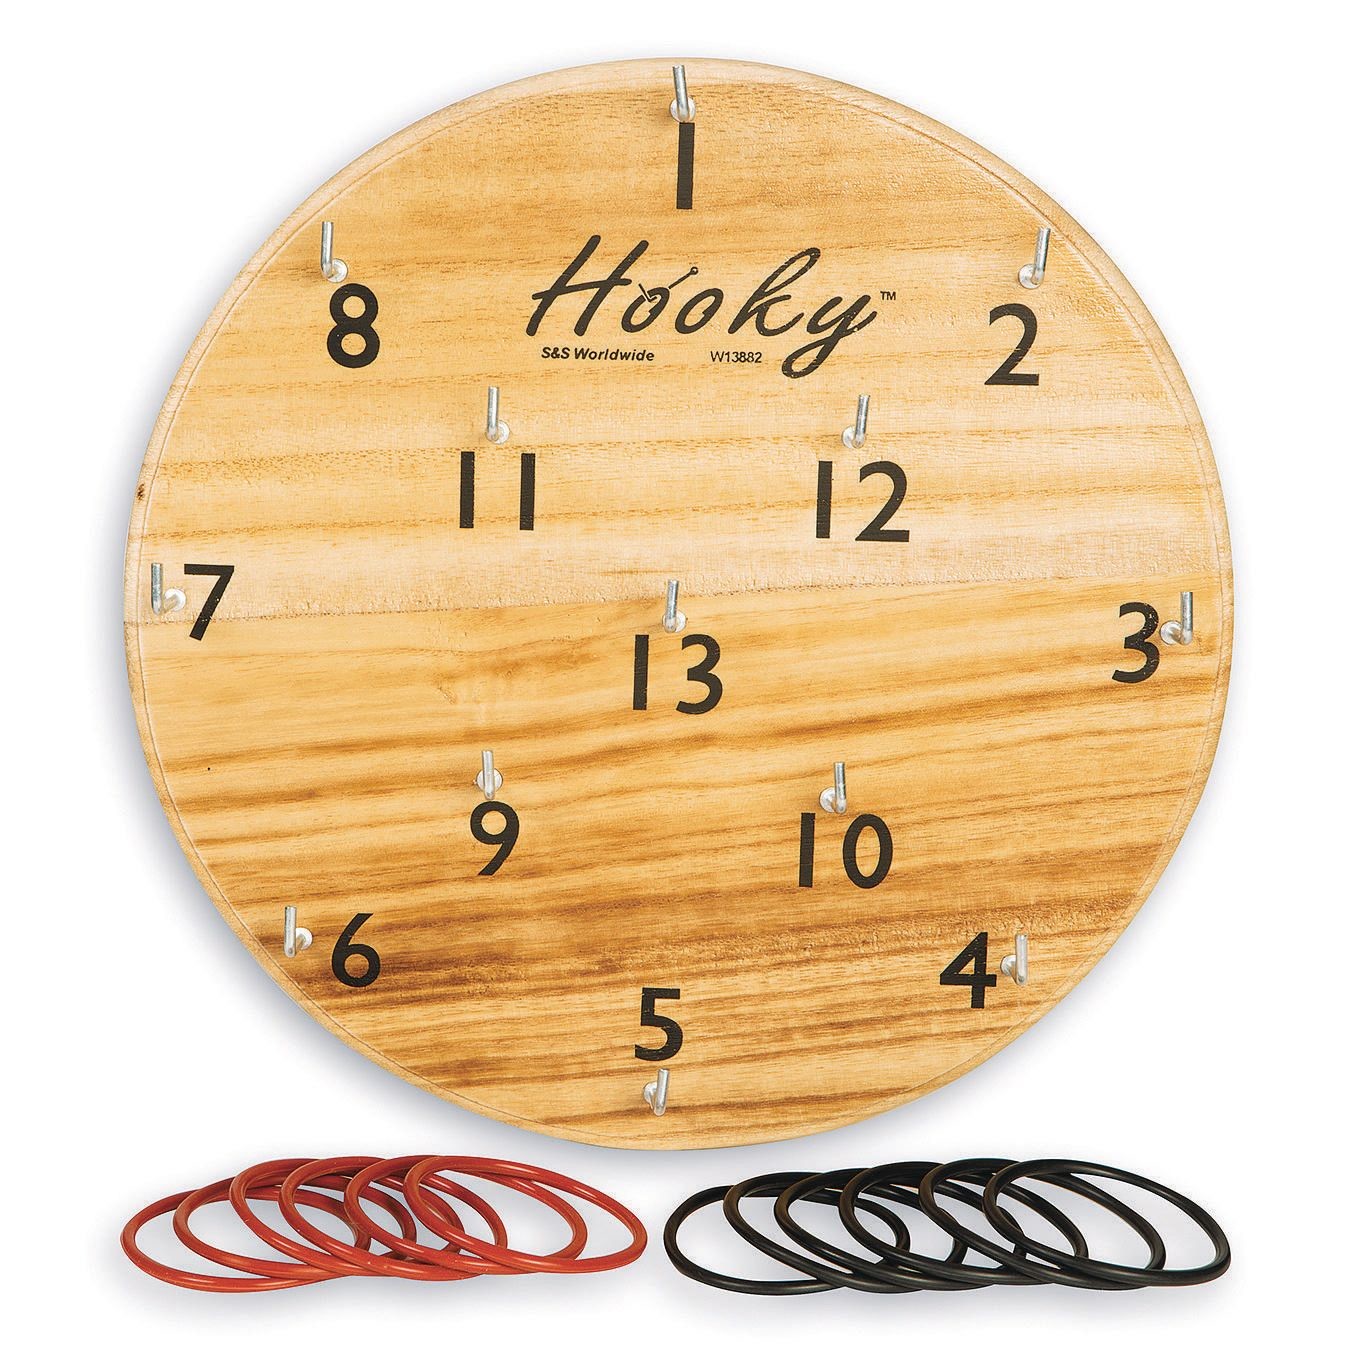 S&S Worldwide Hooky Ring Toss Game. Large Solid Wood 12 Target with 13 Hooks, Plus 12 Rubber Rings and Instructions. Easy, Fun Activity for Kids